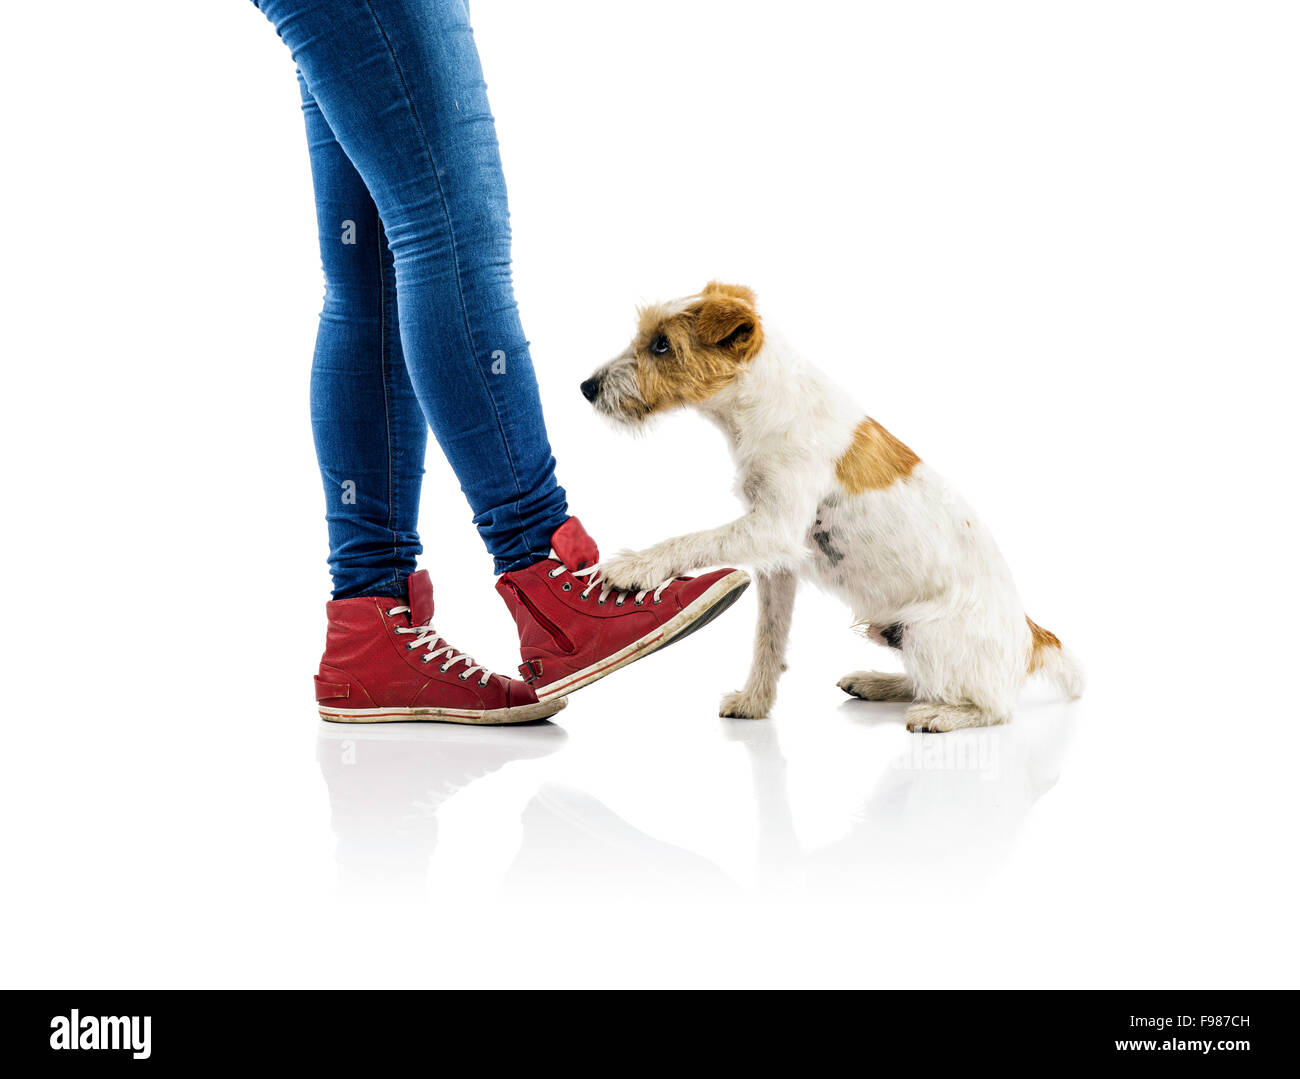 Cute parson russell terrier dog begging to play at owner's feet isolated on white background Stock Photo